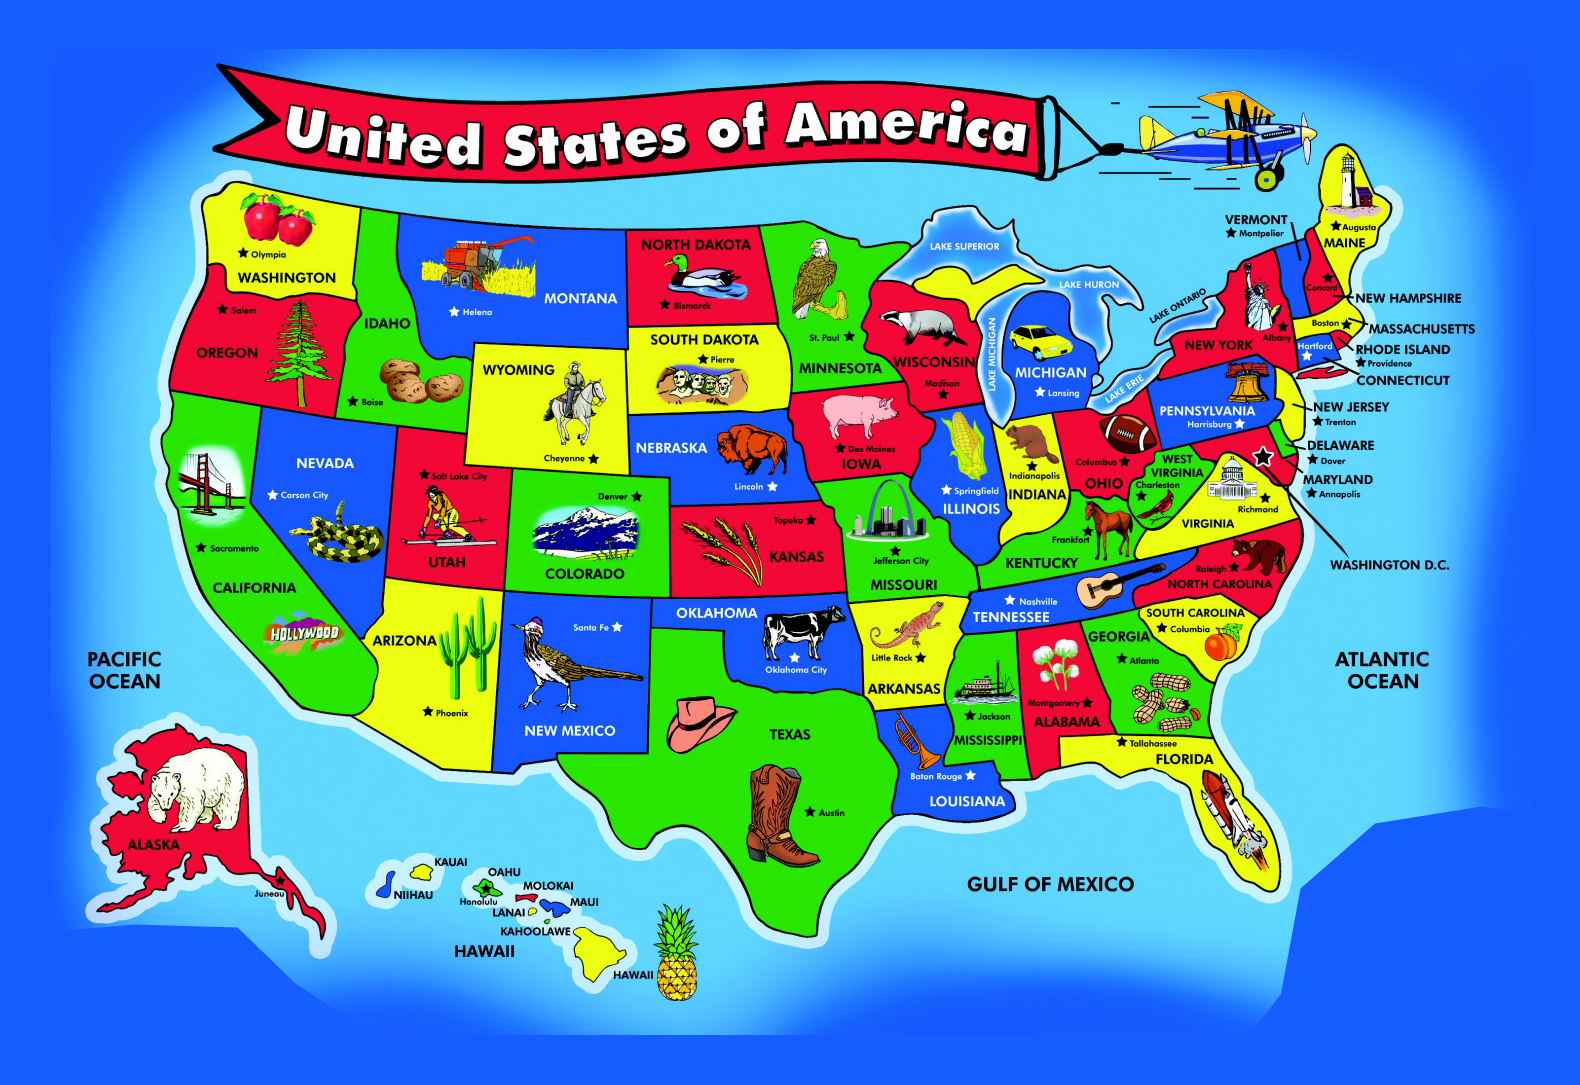 Pictures Of Maps Of The Usa Large kids map of the USA | USA | Maps of the USA | Maps 